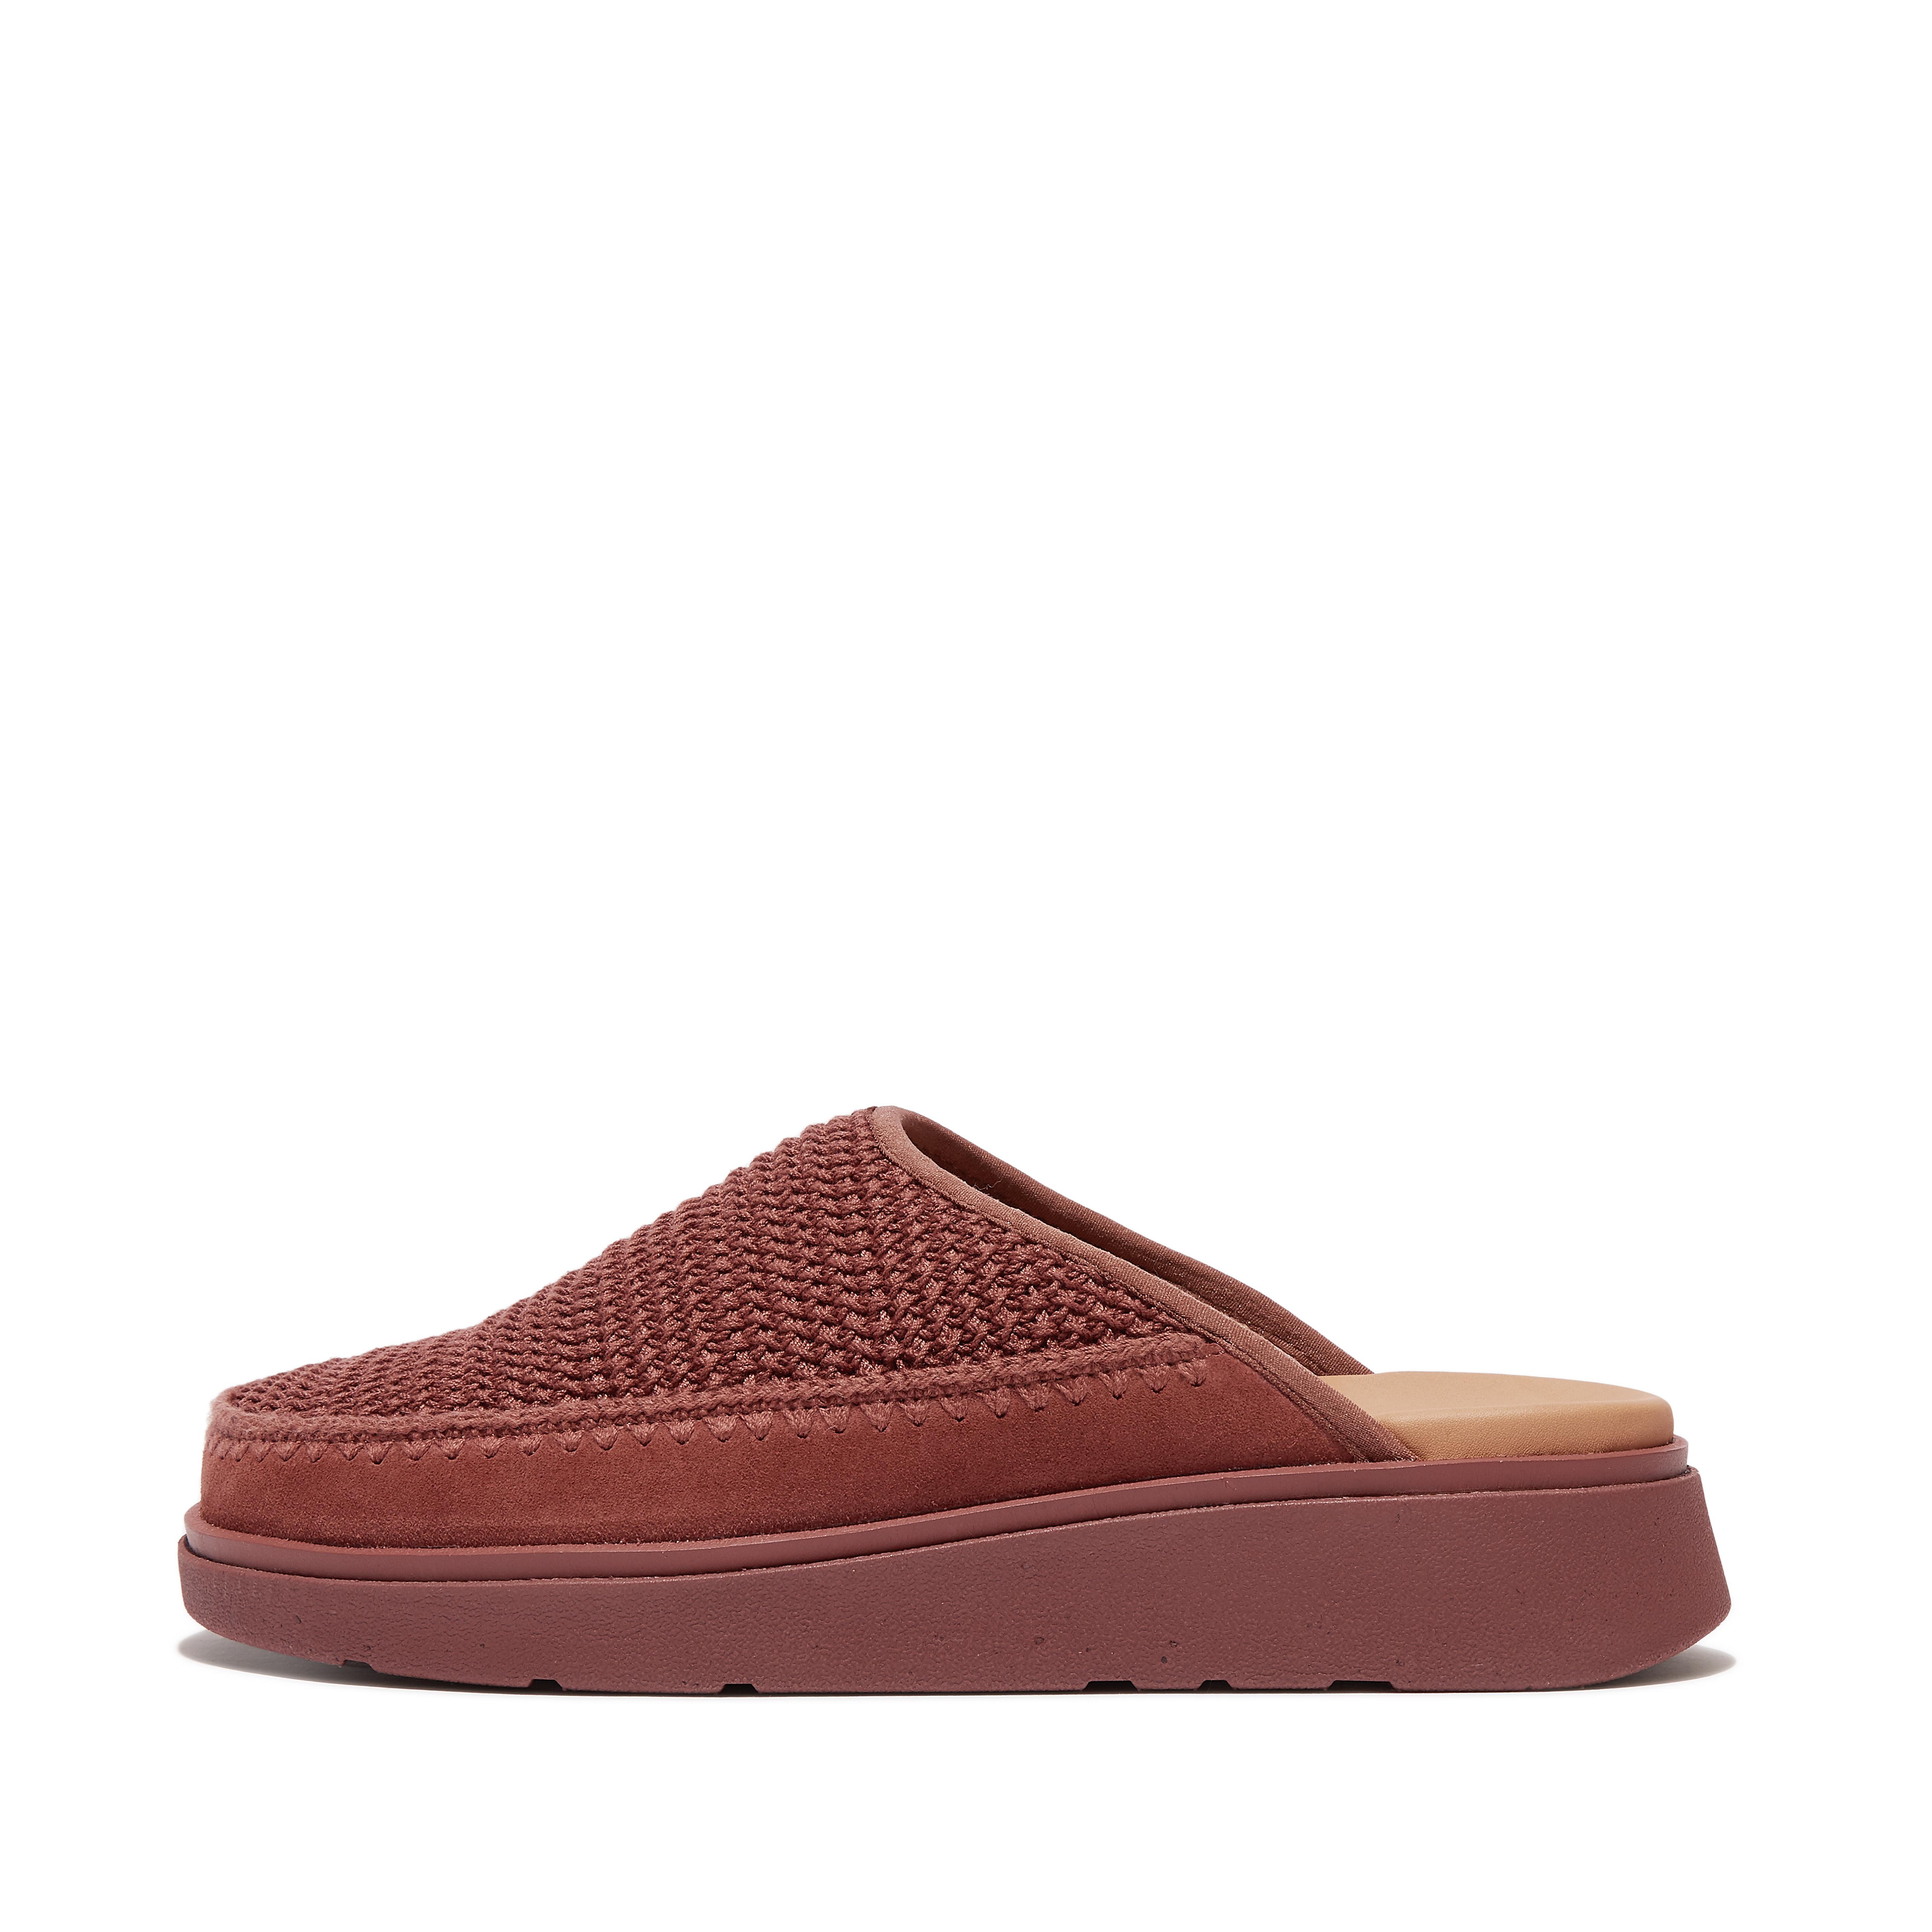 Fitflop Crochet Mules,Clay Brown